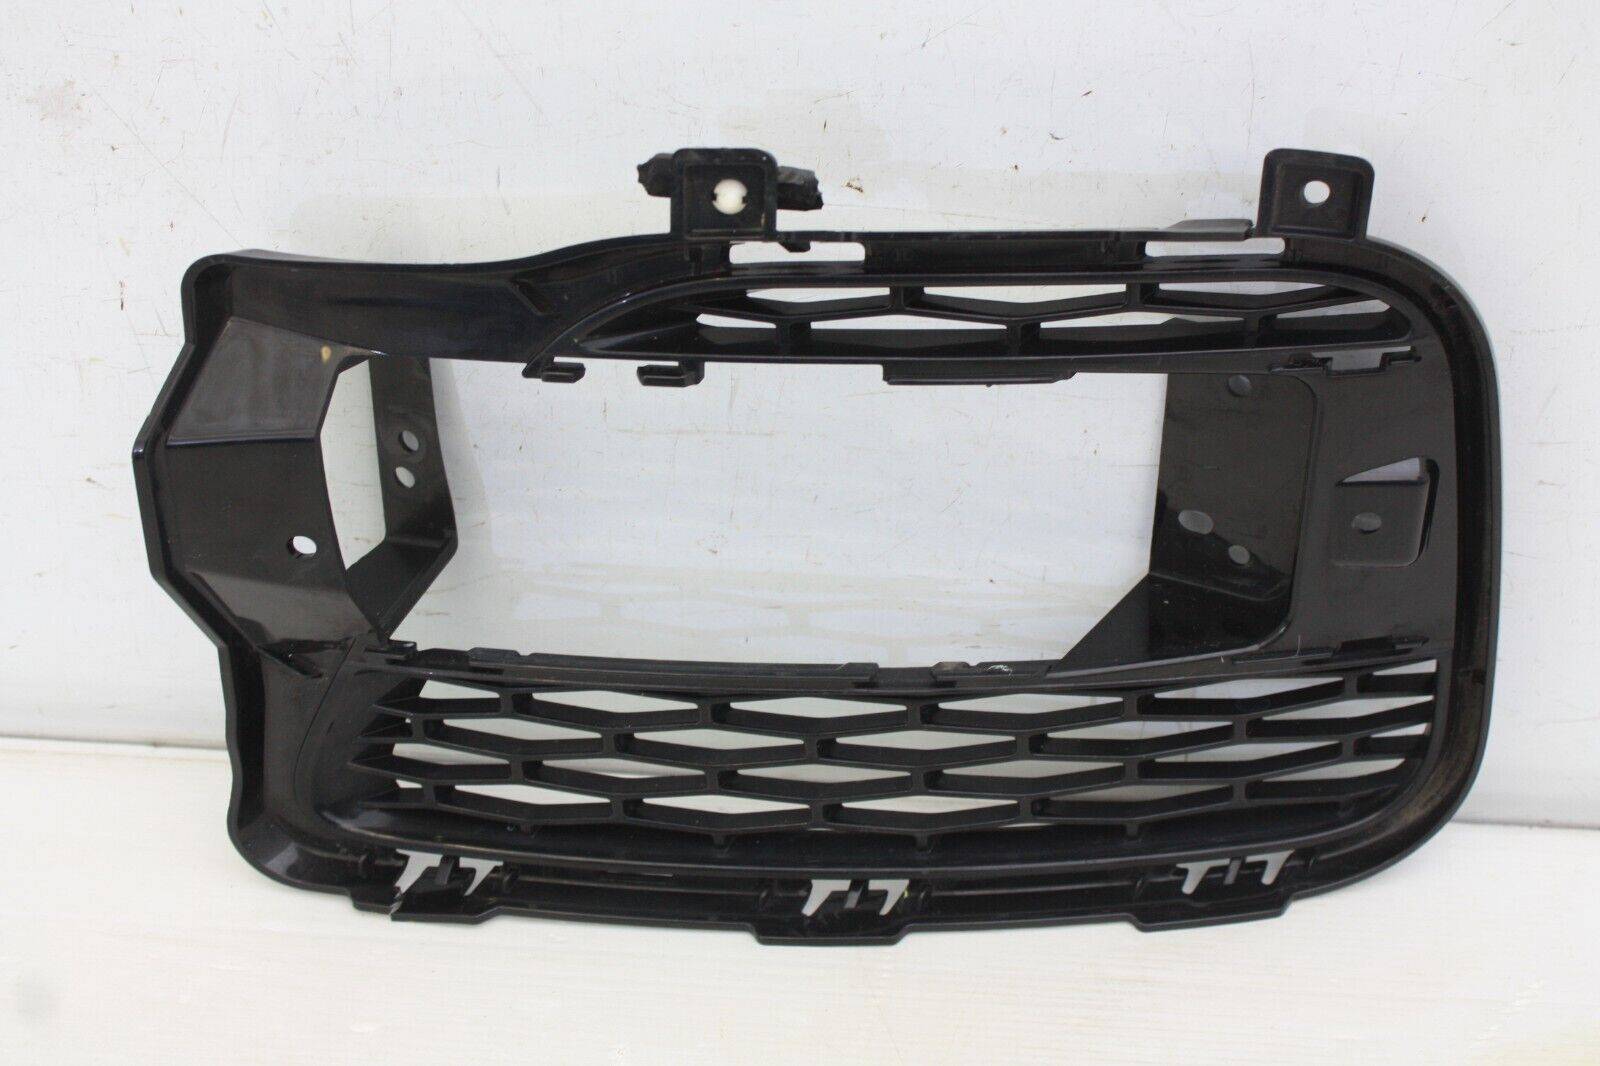 Range Rover Sport Front Bumper Right Side Grill 2013 to 2018 DK62 17K946 AA 175687074084